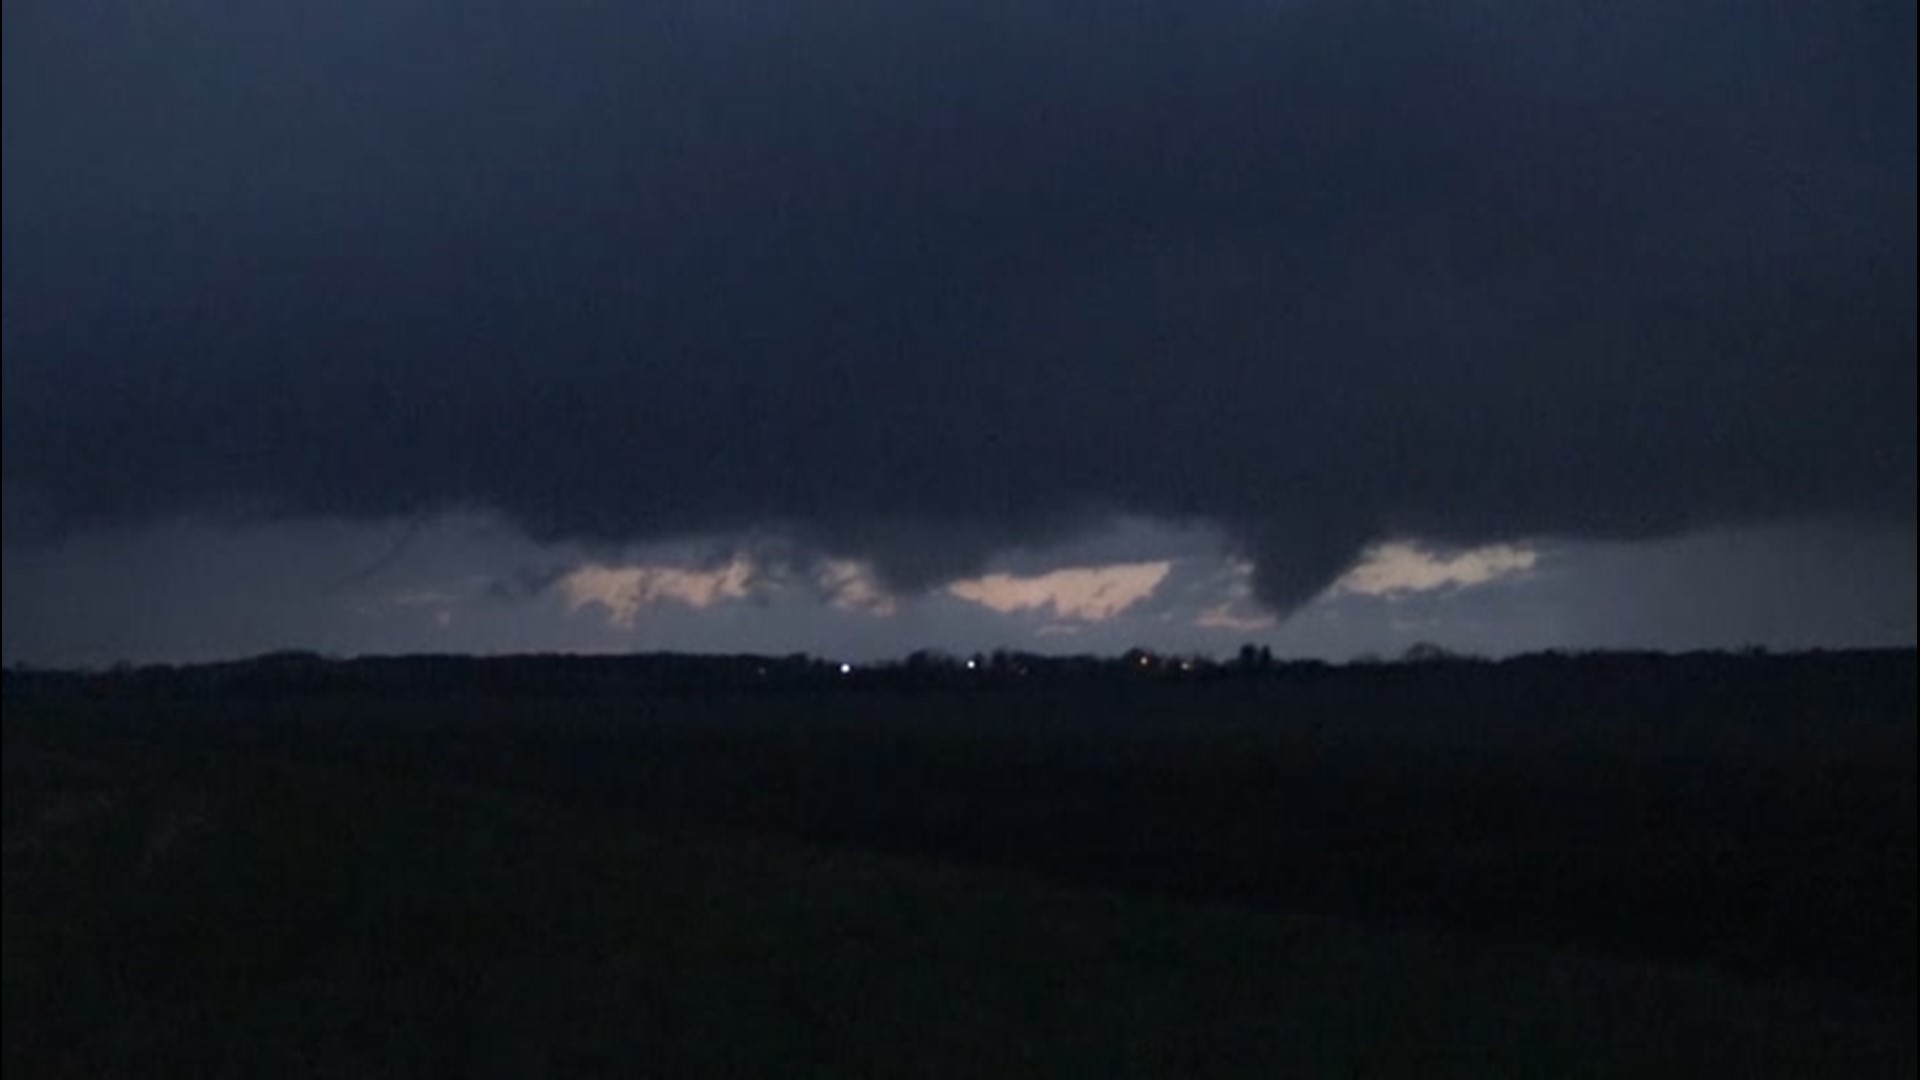 Blake Naftel was near Woodhull, Illinois, on March 28 when funnel clouds started appearing in the sky. At one point two were spotted at the same time.